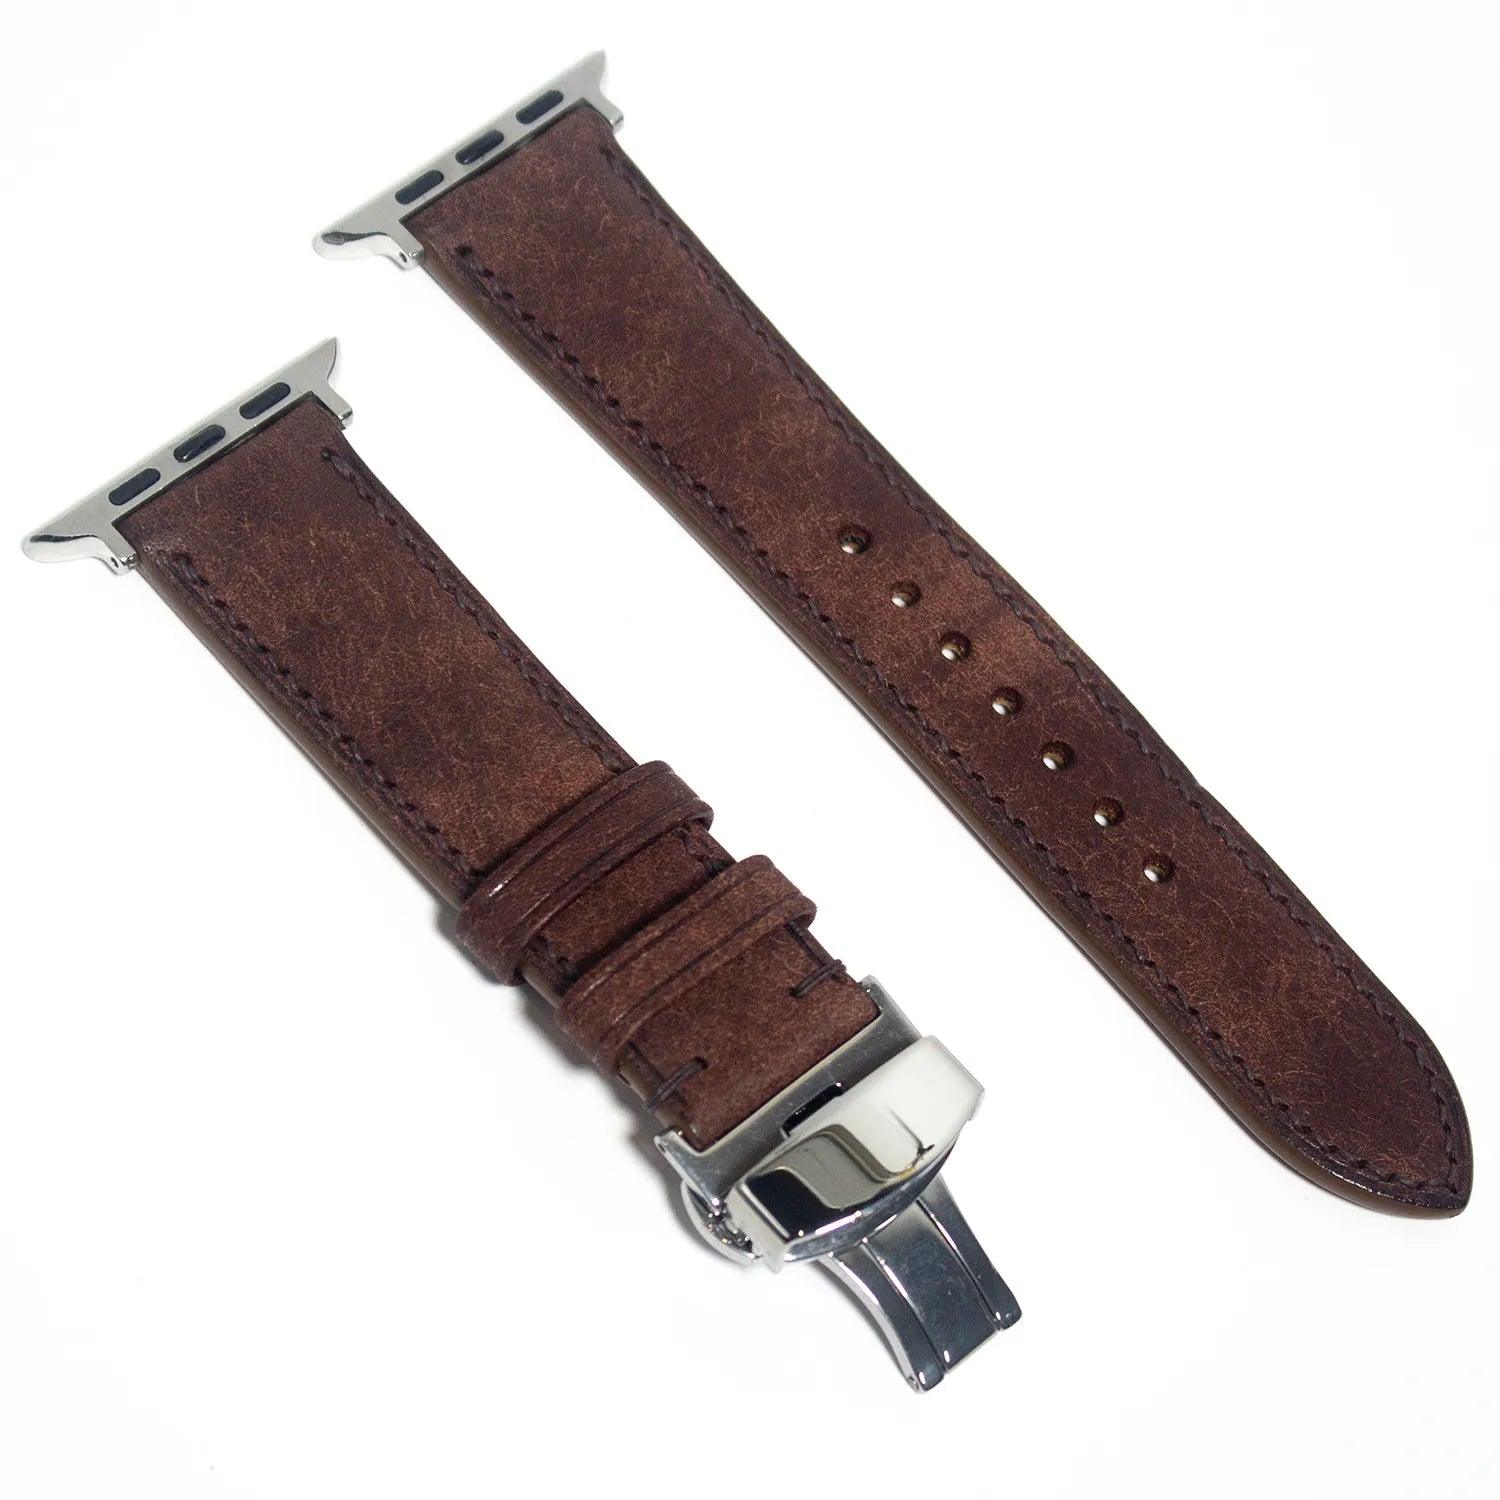 Luxurious leather Apple Watch band made with Italian brown Pueblo leather, offering unmatched artisanal elegance.